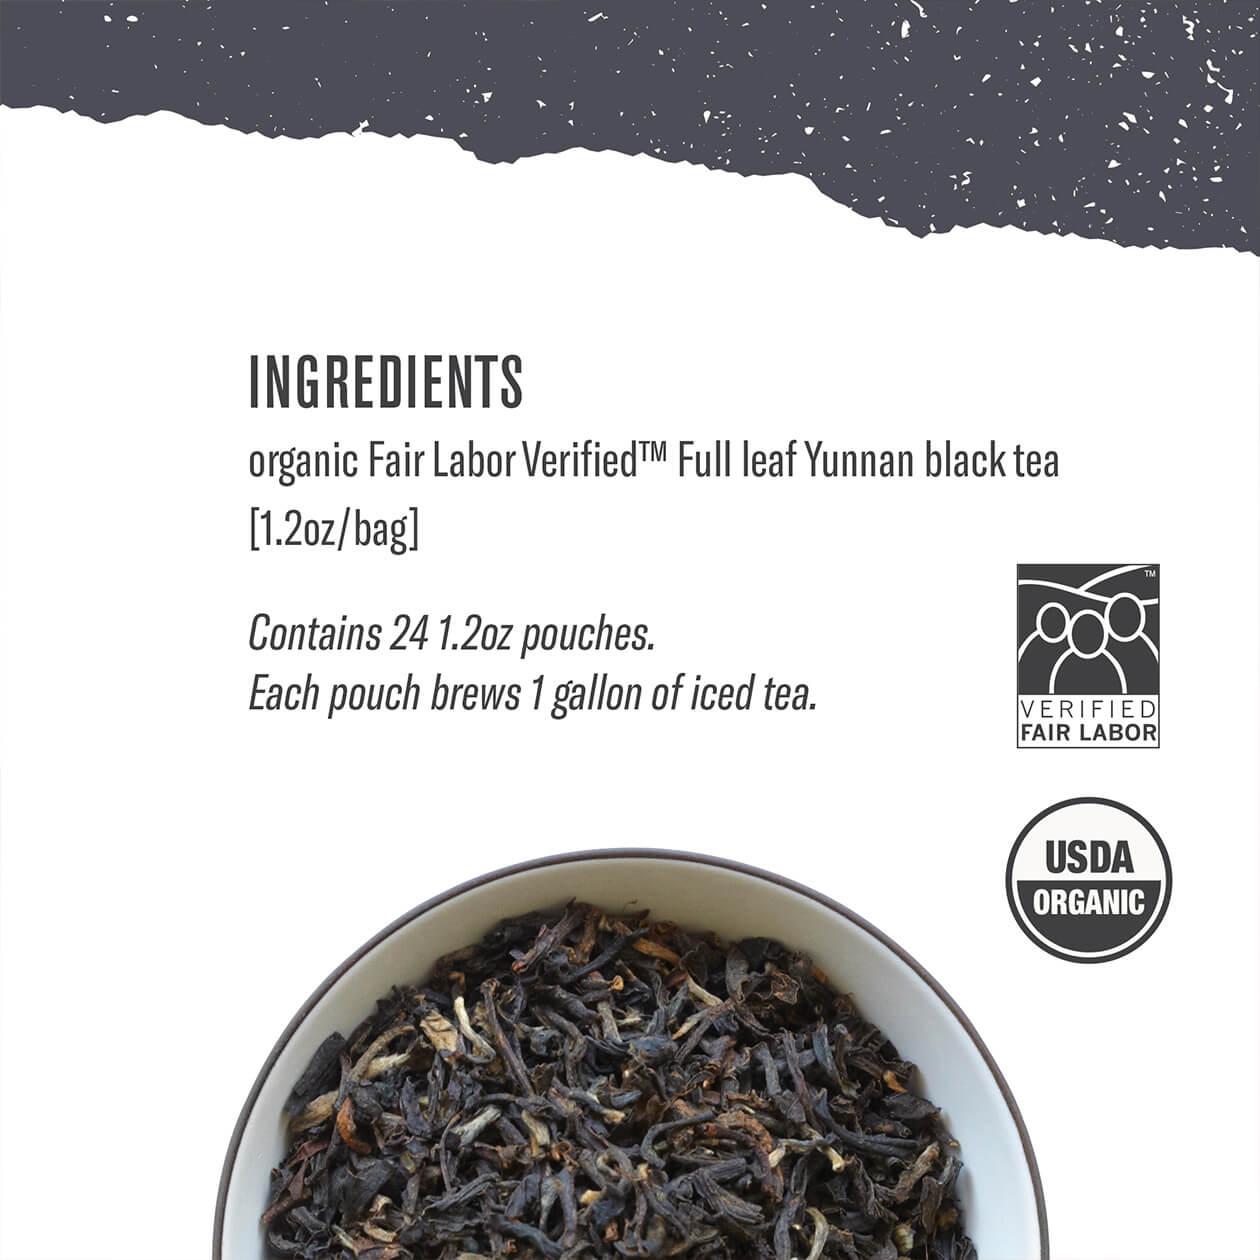 Classic Black Iced Tea Ingredients list and organic certification